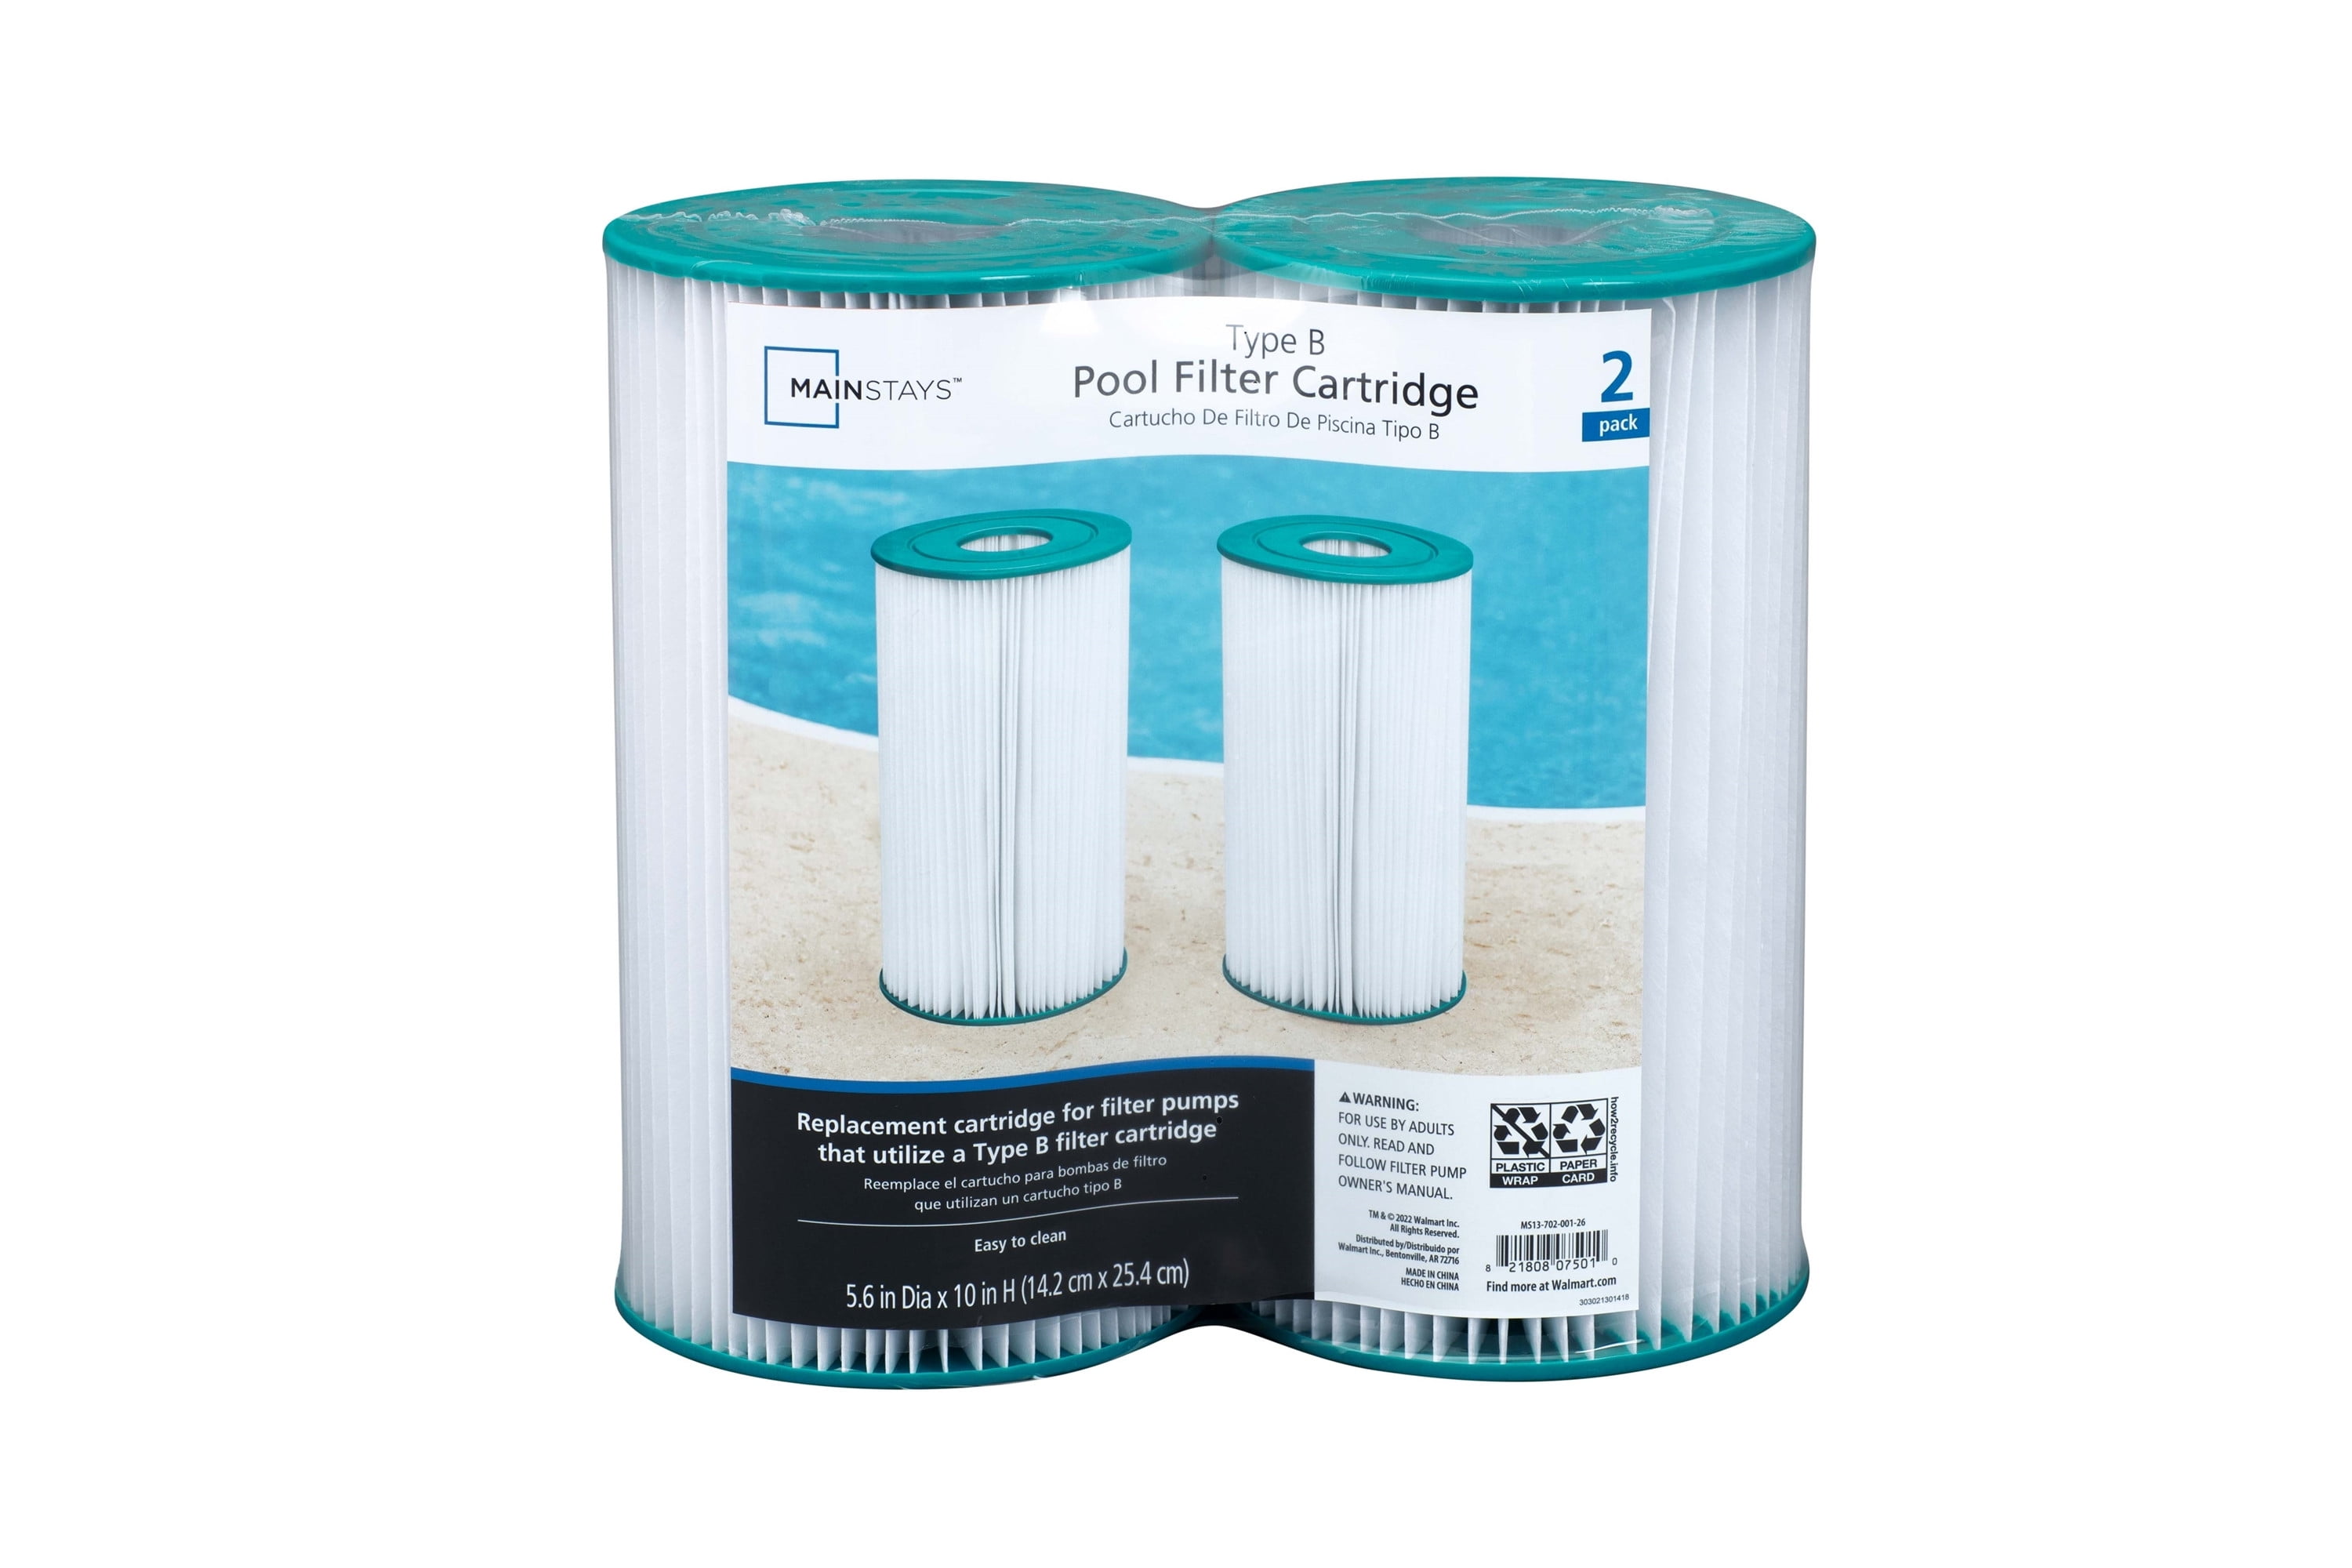 Mainstays Type IV, B Pool Filter Cartridge for Above-Ground Pool, 2 Pack